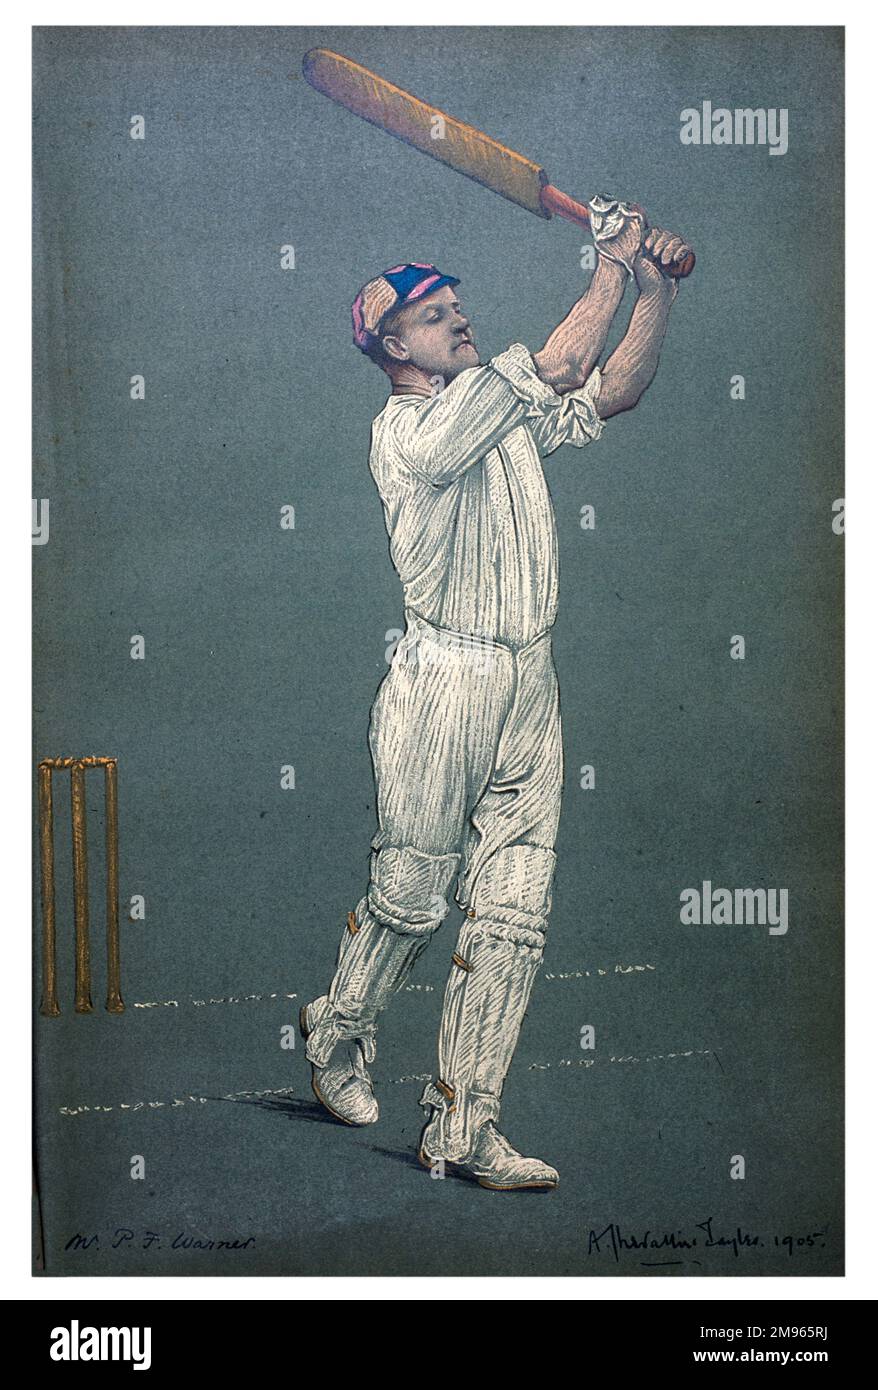 Pelham F. Warner hitting an on-drive. Cricketer for Middlesex and England Stock Photo